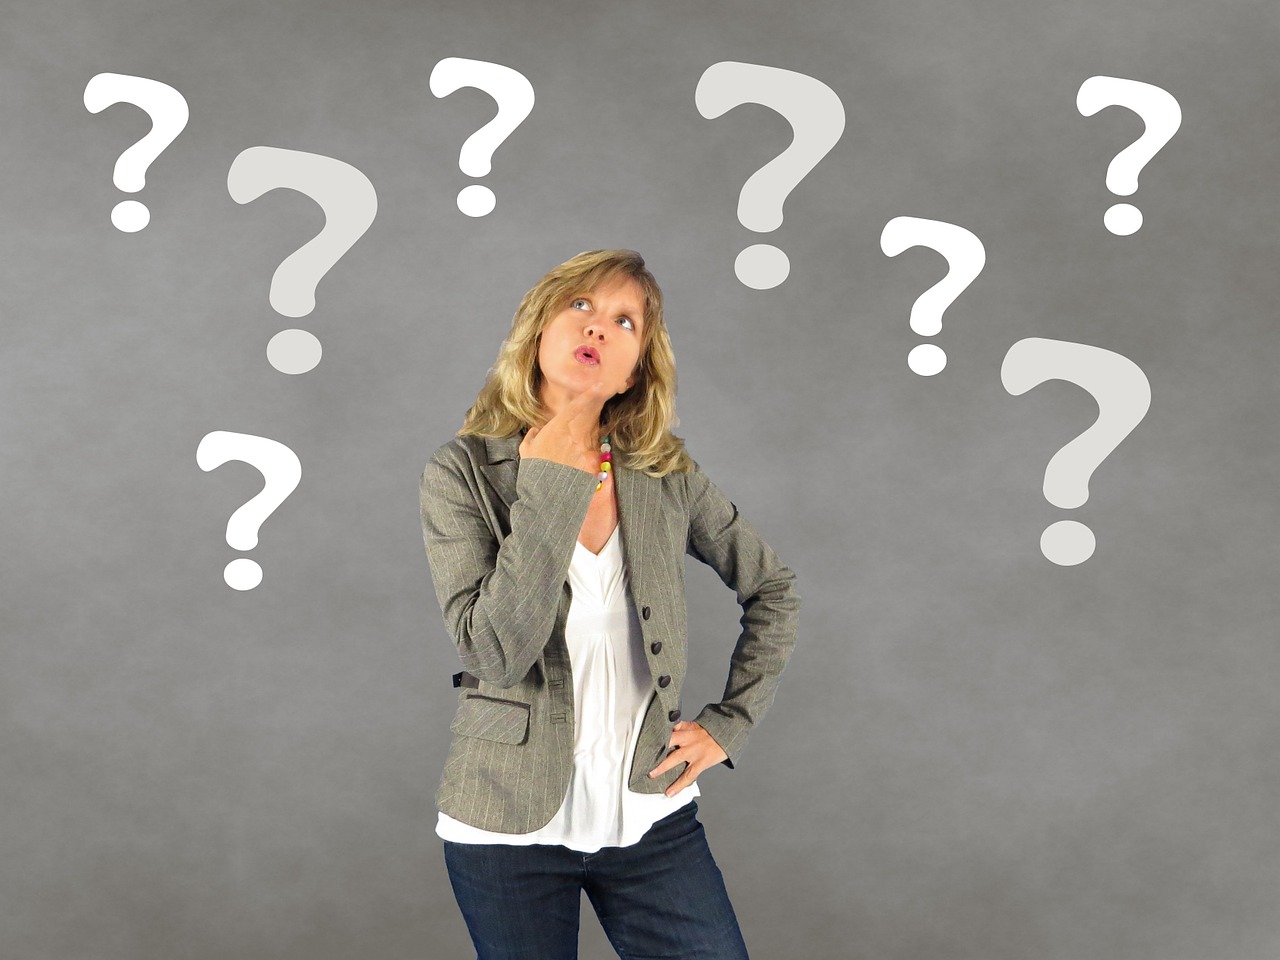 Small business questions to ask as you recover from COVID-19 - a woman ponders surrounded by question marks.